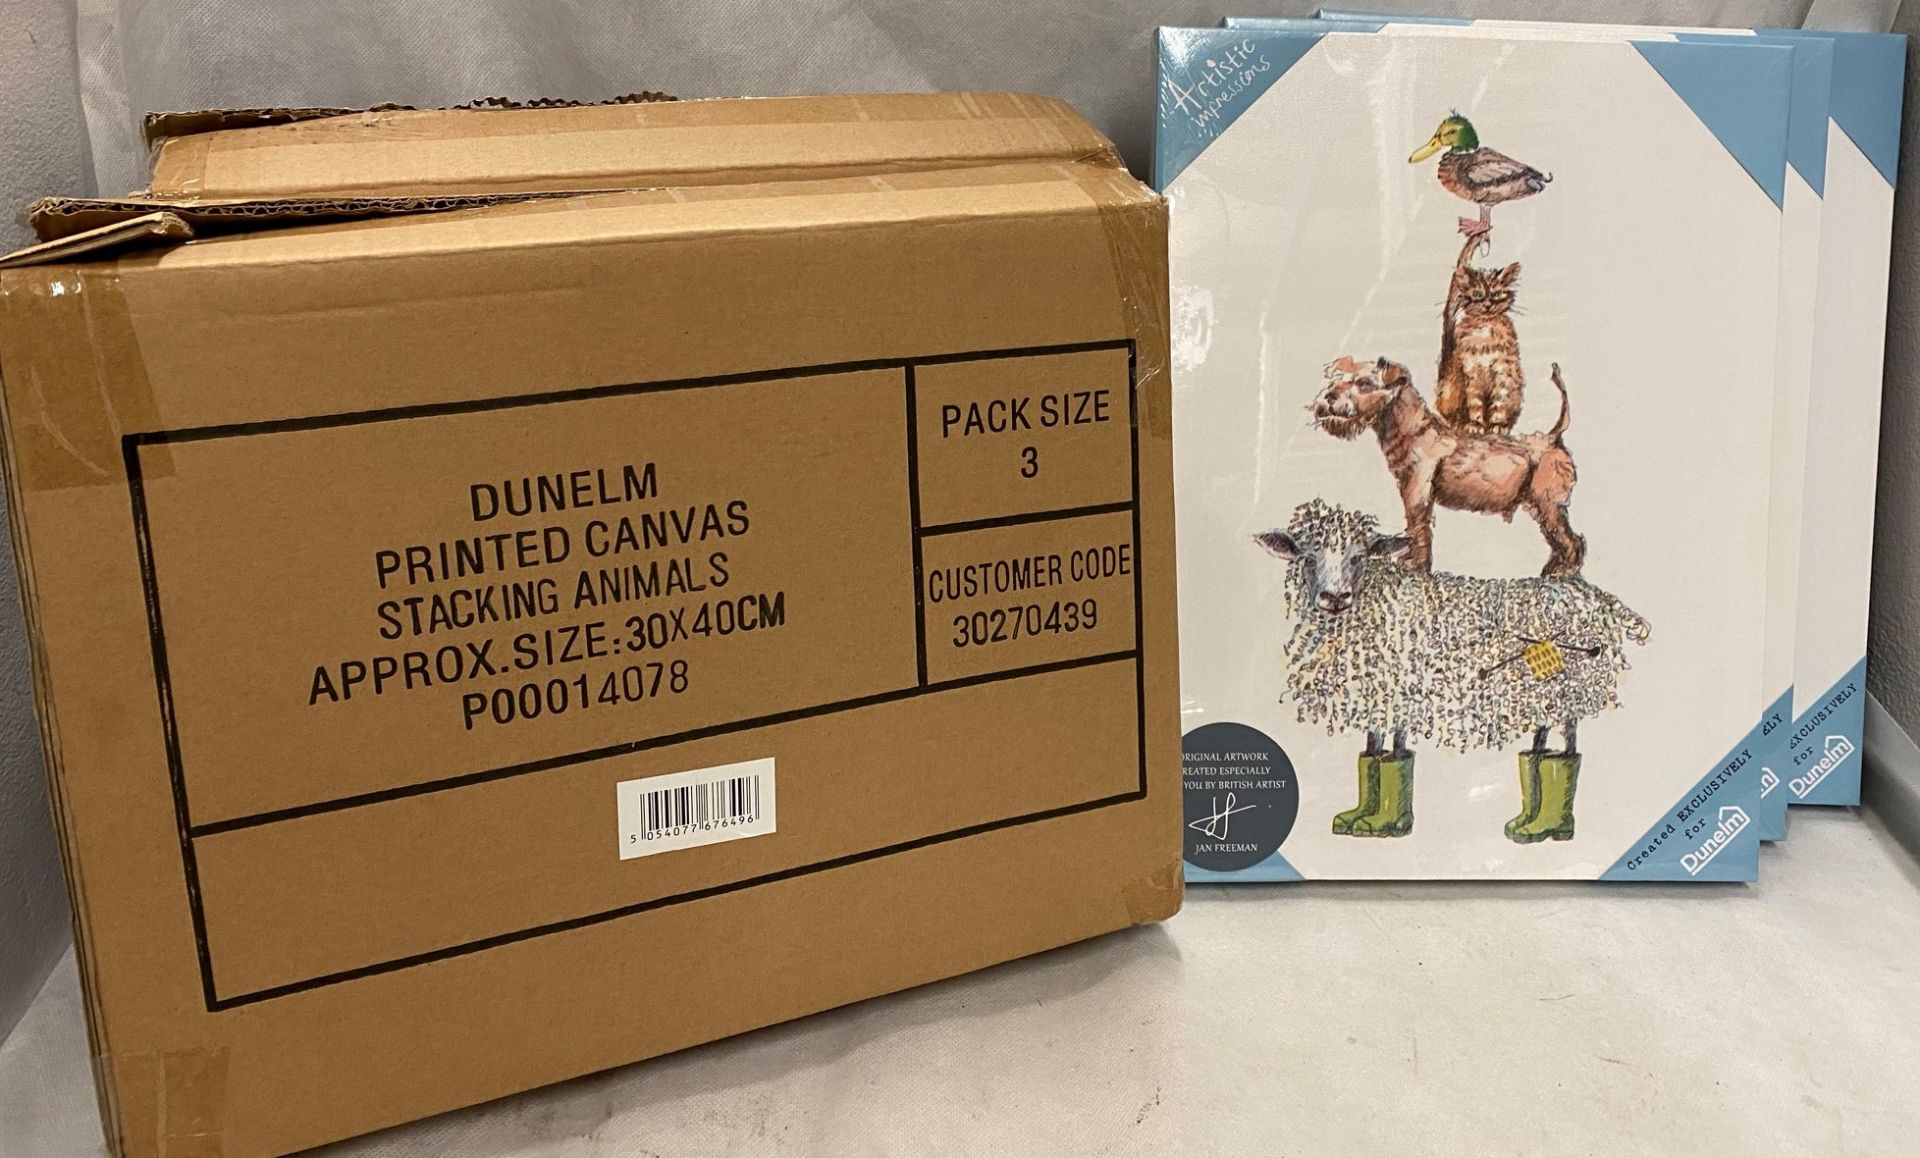 24 x Dunelm artistic impressions printed canvas's stacking animals - 30cm x 40cm (8 outer boxes) - Image 2 of 2